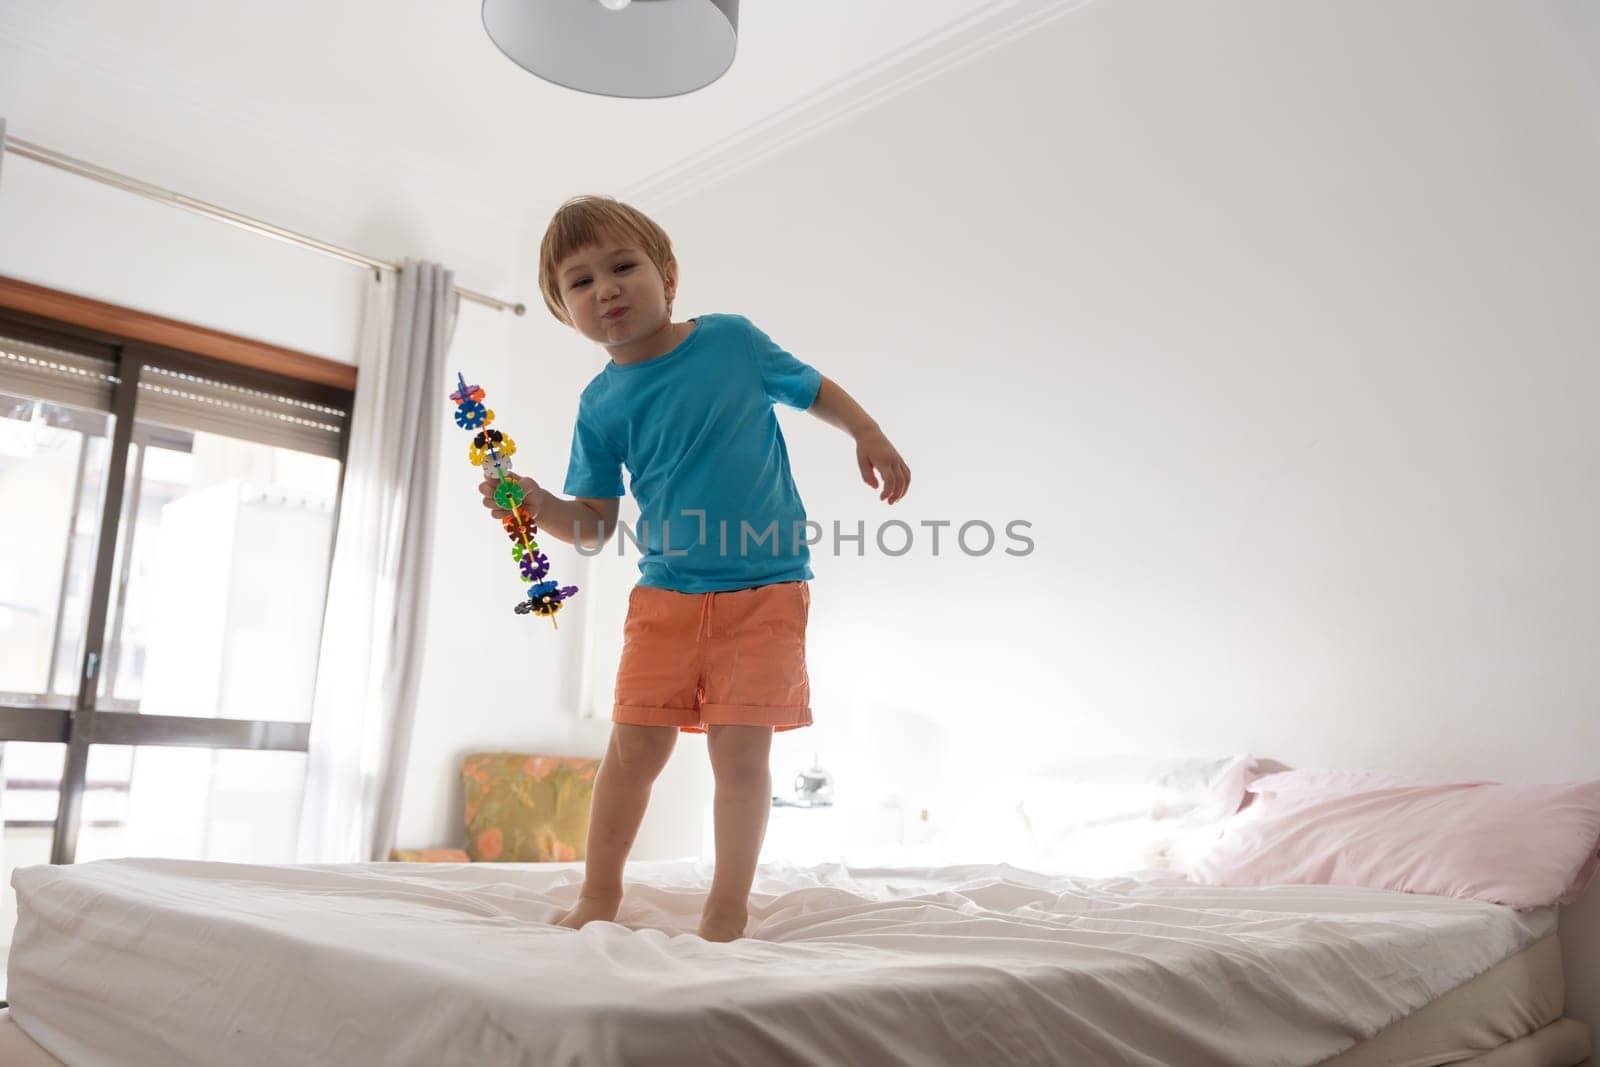 A young boy standing on top of a bed